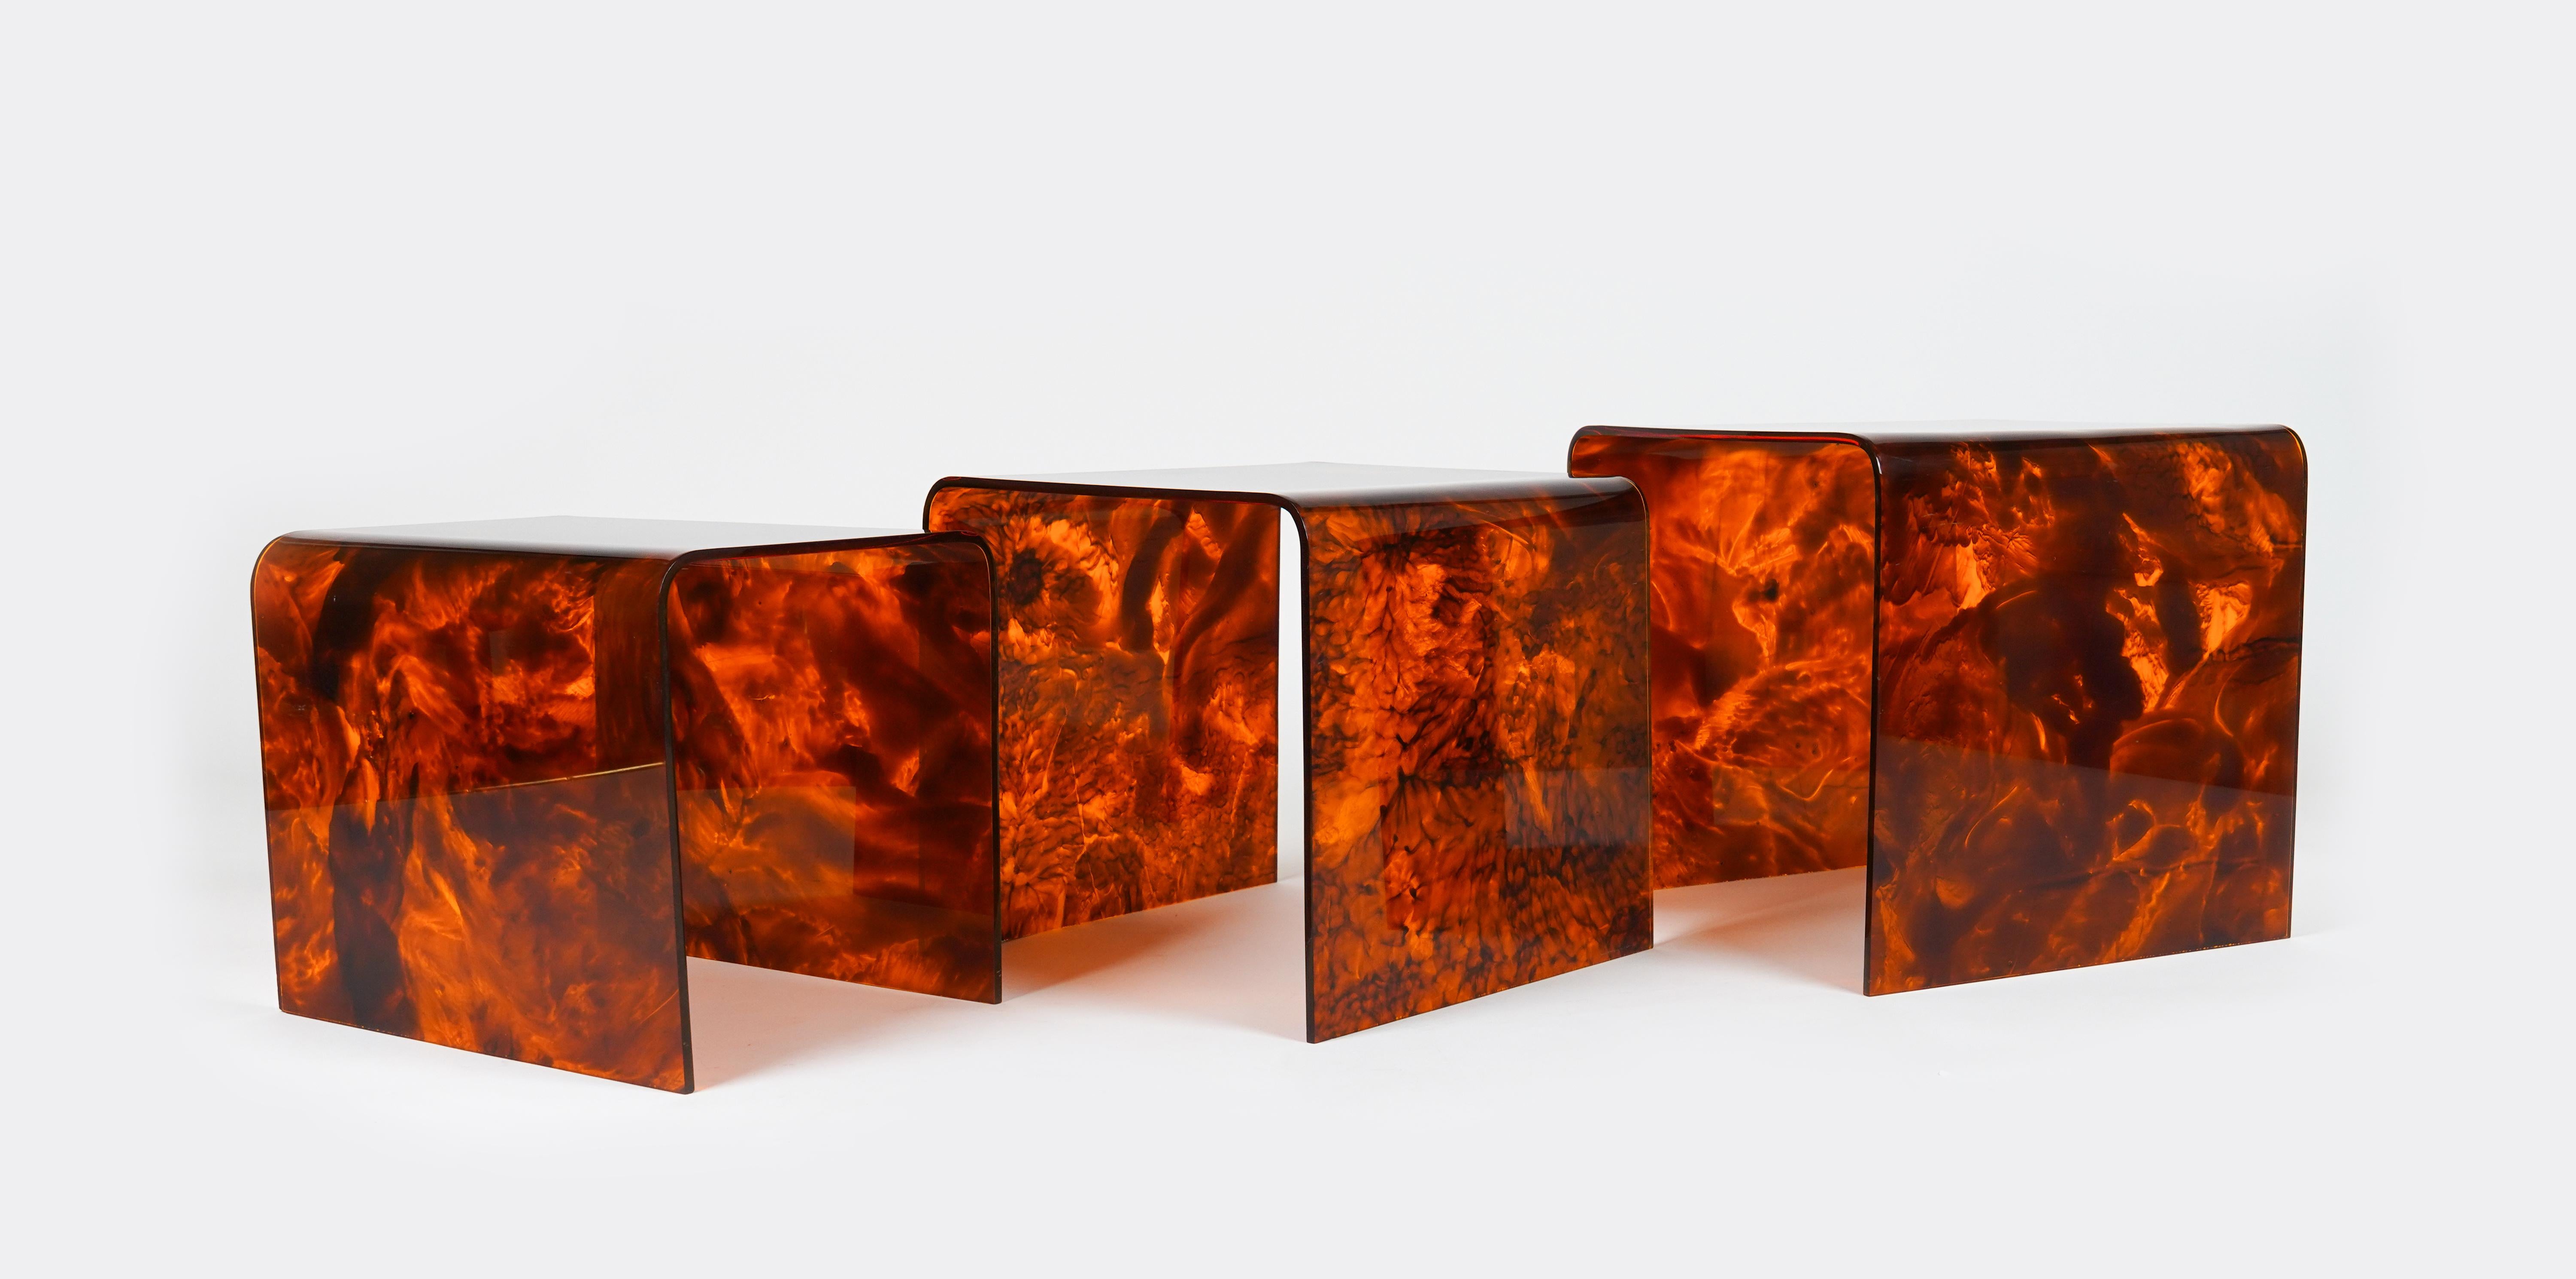 Plexiglass Set of 3 Nesting Tables in Lucite Faux Tortoiseshell Christian Dior, Italy 1970s For Sale